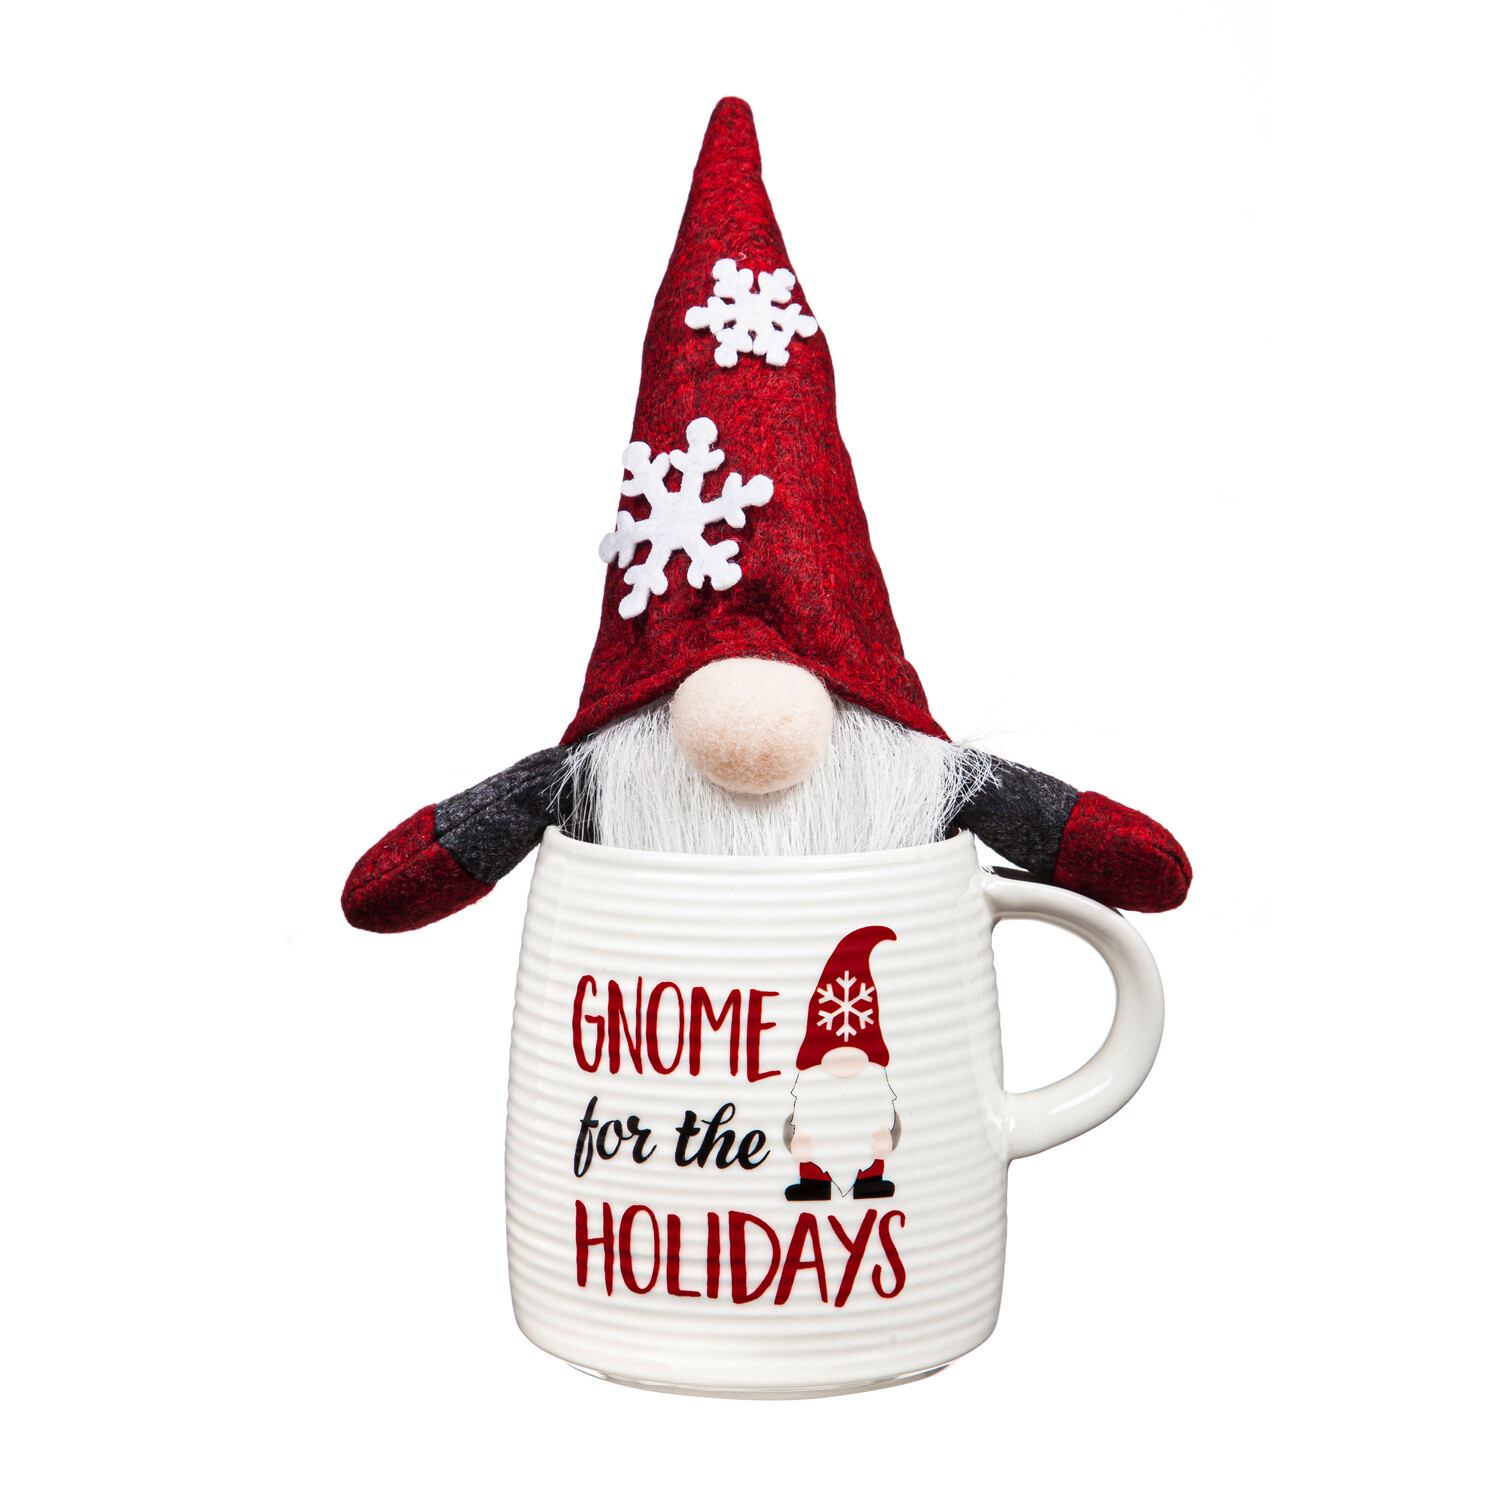 FINAL SALE - Ceramic Cup with 5" Plush Holiday Gnome